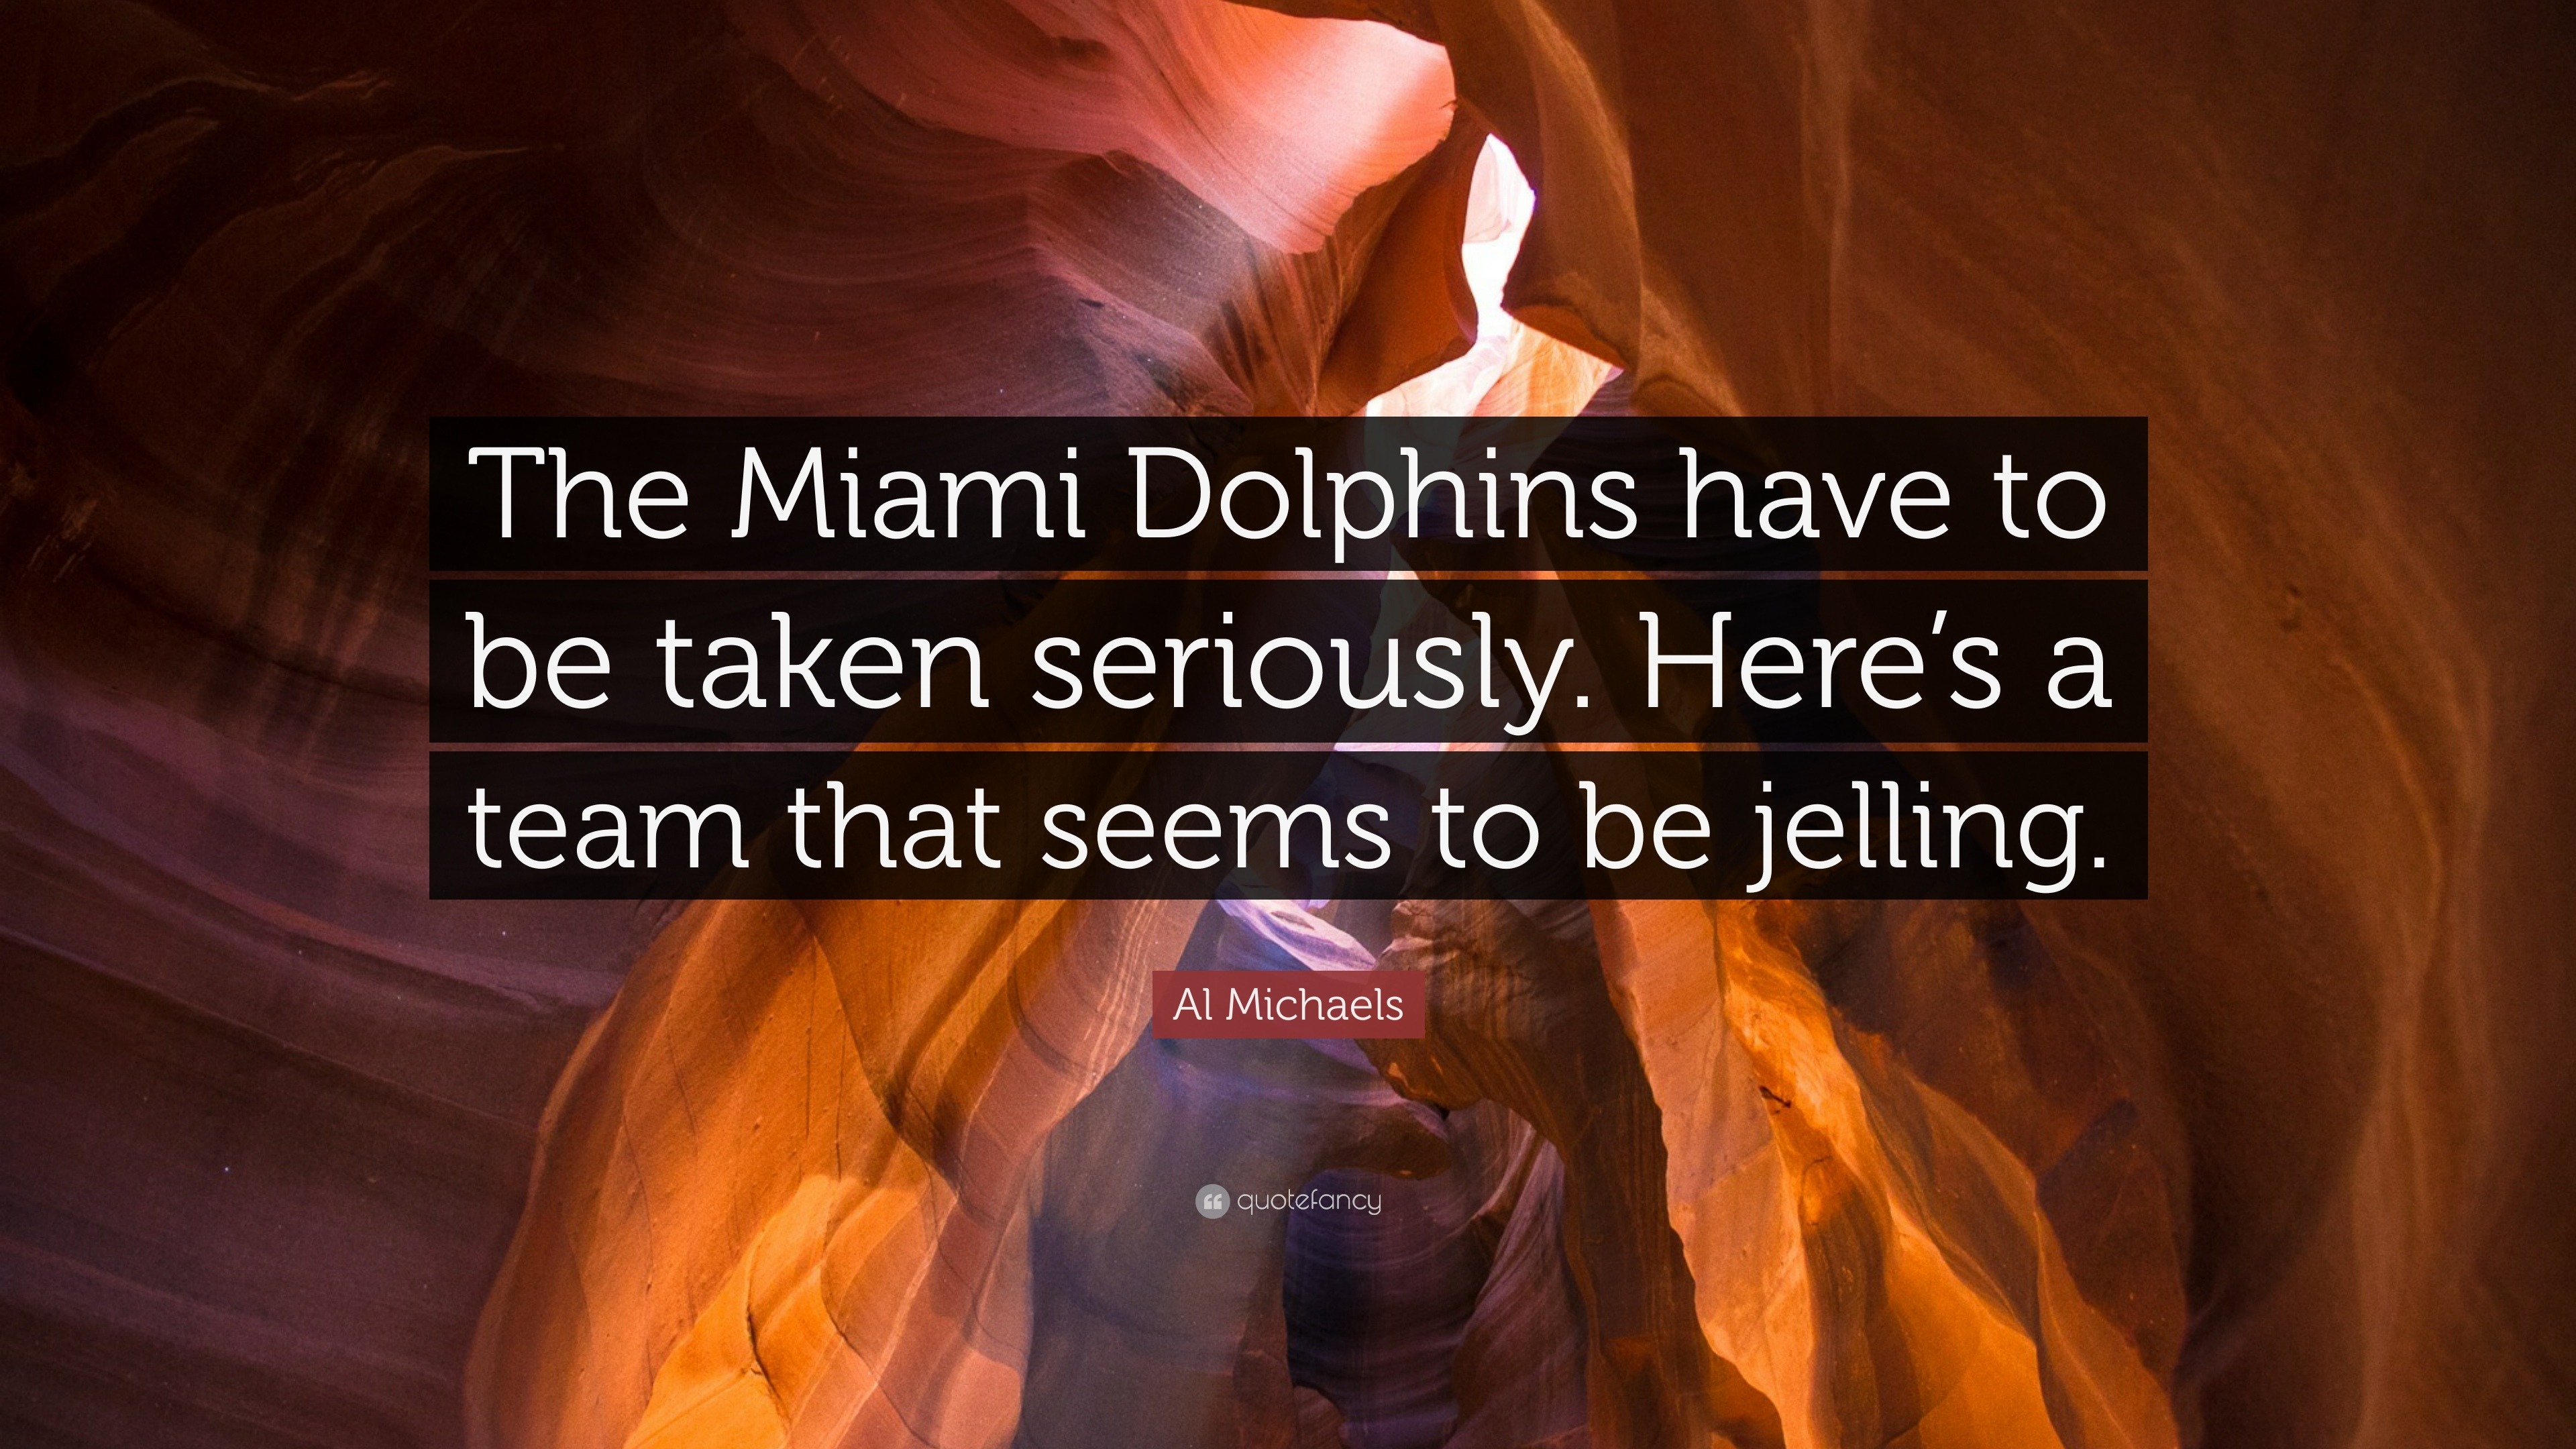 Al Michaels - The Miami Dolphins have to be taken